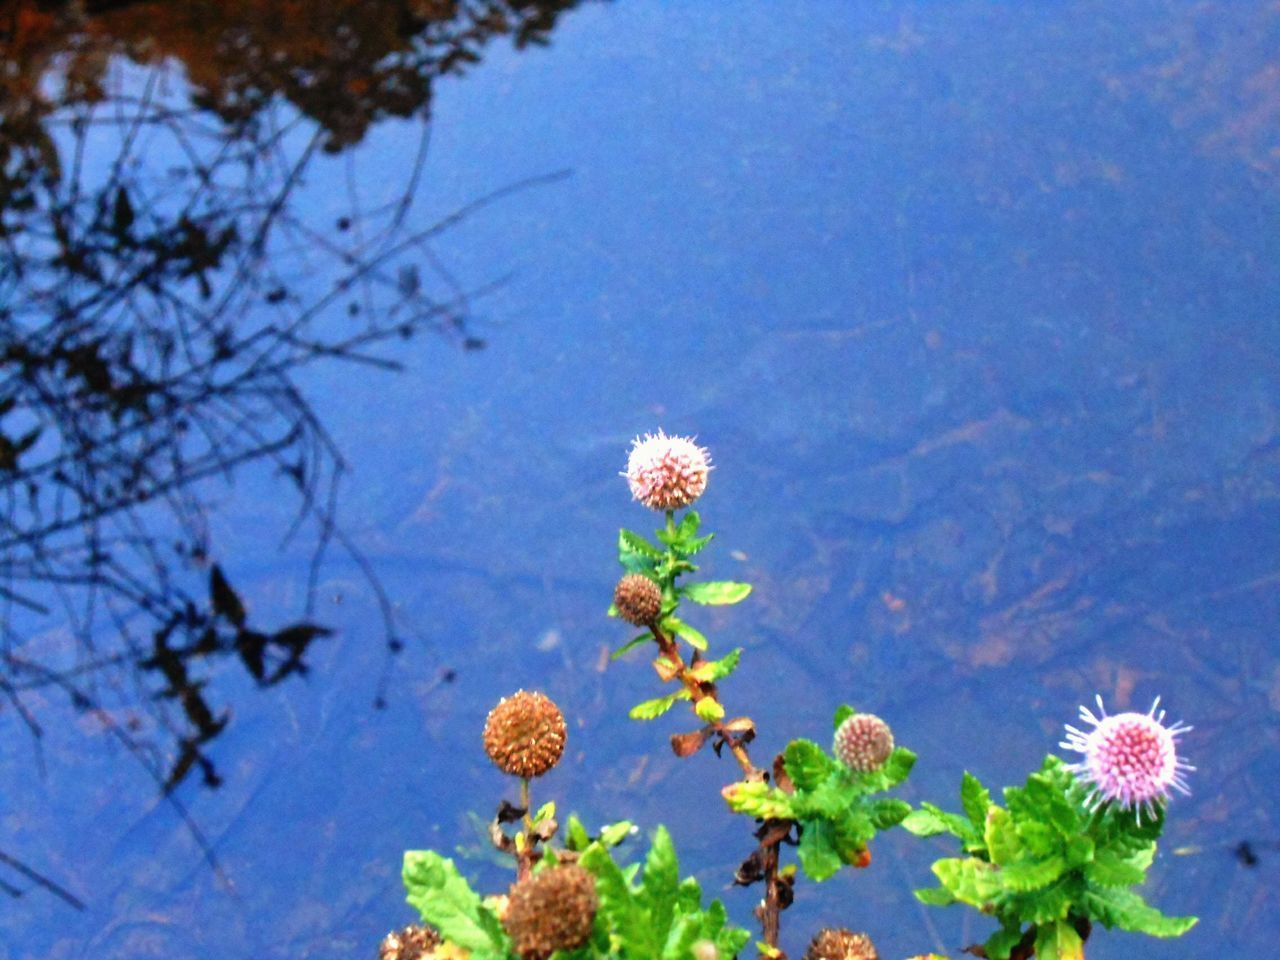 flower, freshness, fragility, petal, growth, beauty in nature, blooming, plant, flower head, nature, water, in bloom, lake, blossom, stem, leaf, tranquility, springtime, blue, pond